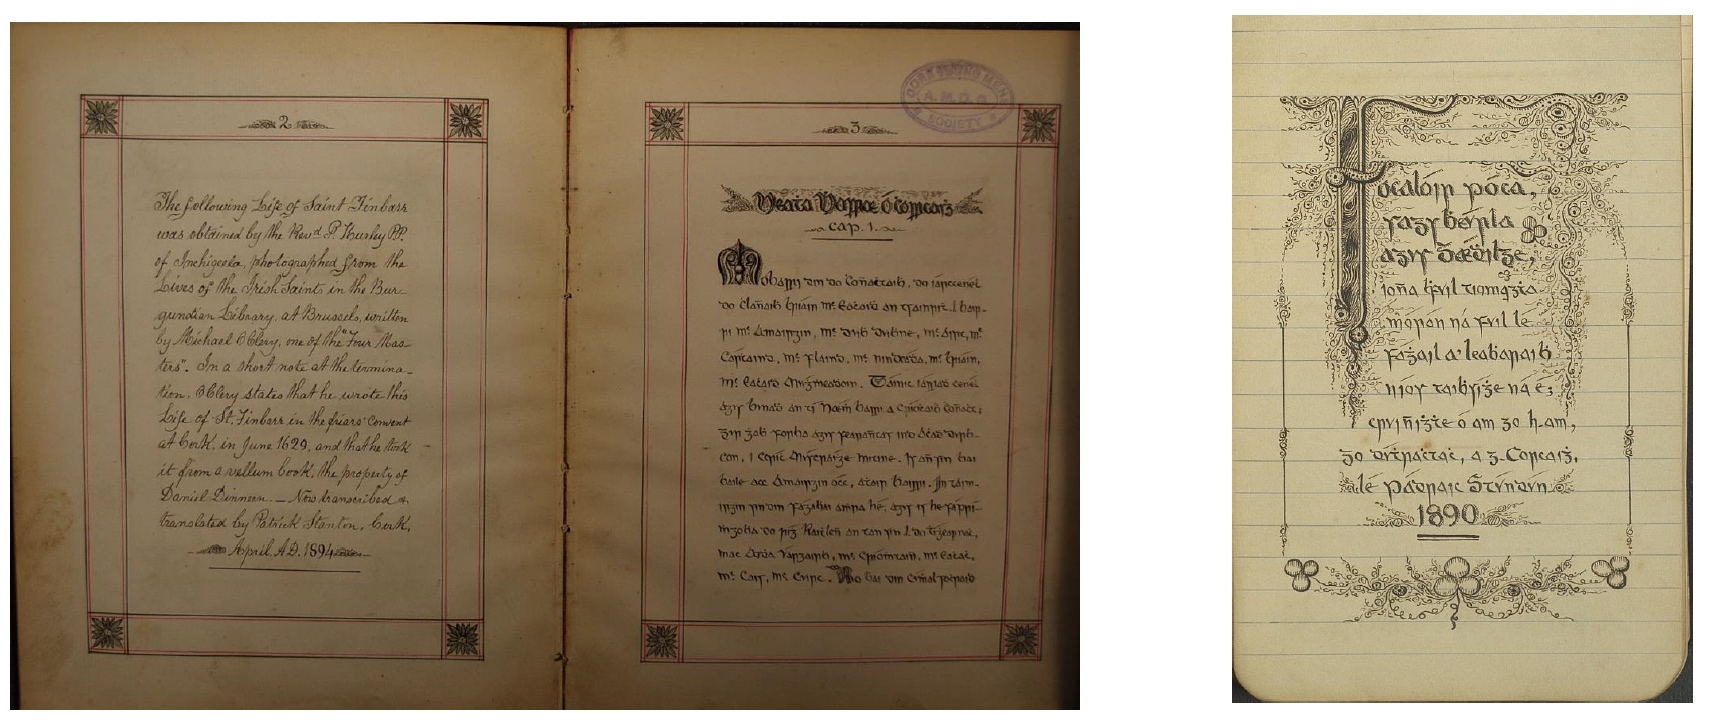 Two images of manuscripts. On the left is a bilingual manuscript. The page on the left is in English and the page on the right is in Irish. Each page is framed by a decorative border. On the right is a decorated letter F around which is the text describing the manuscript. 